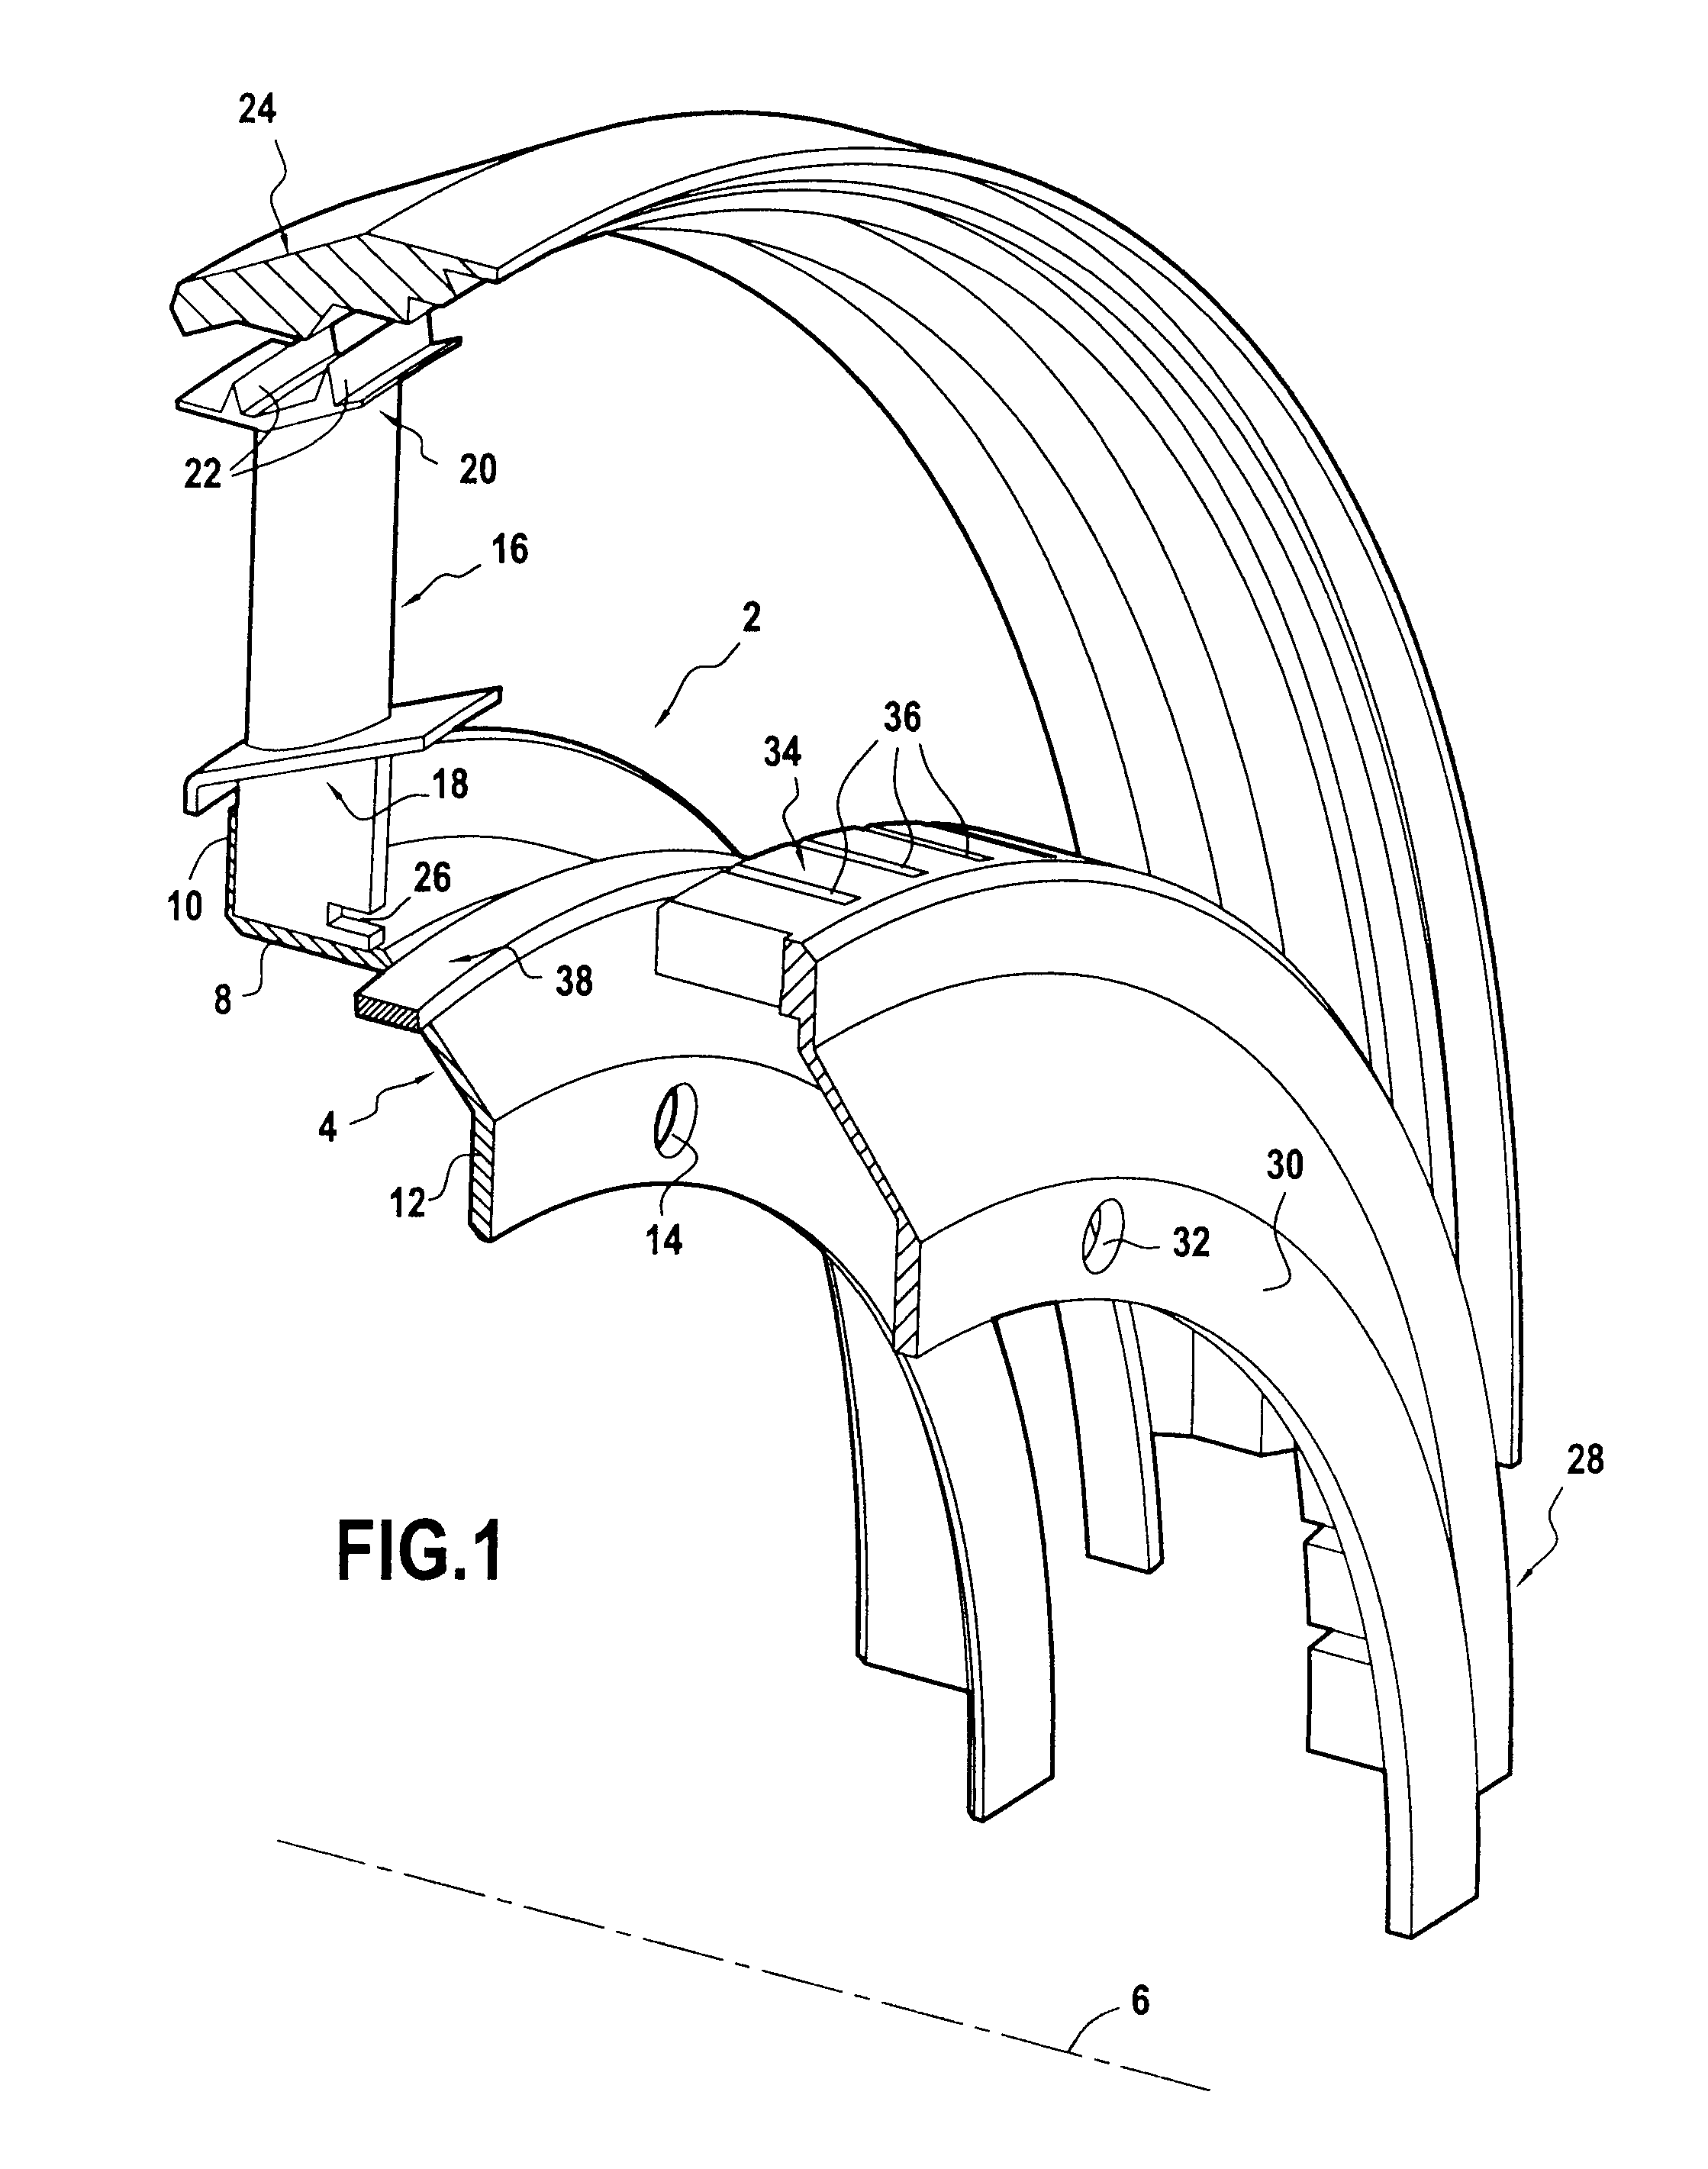 Turbine engine rotor wheel with blades made of a composite material provided with a spring ring